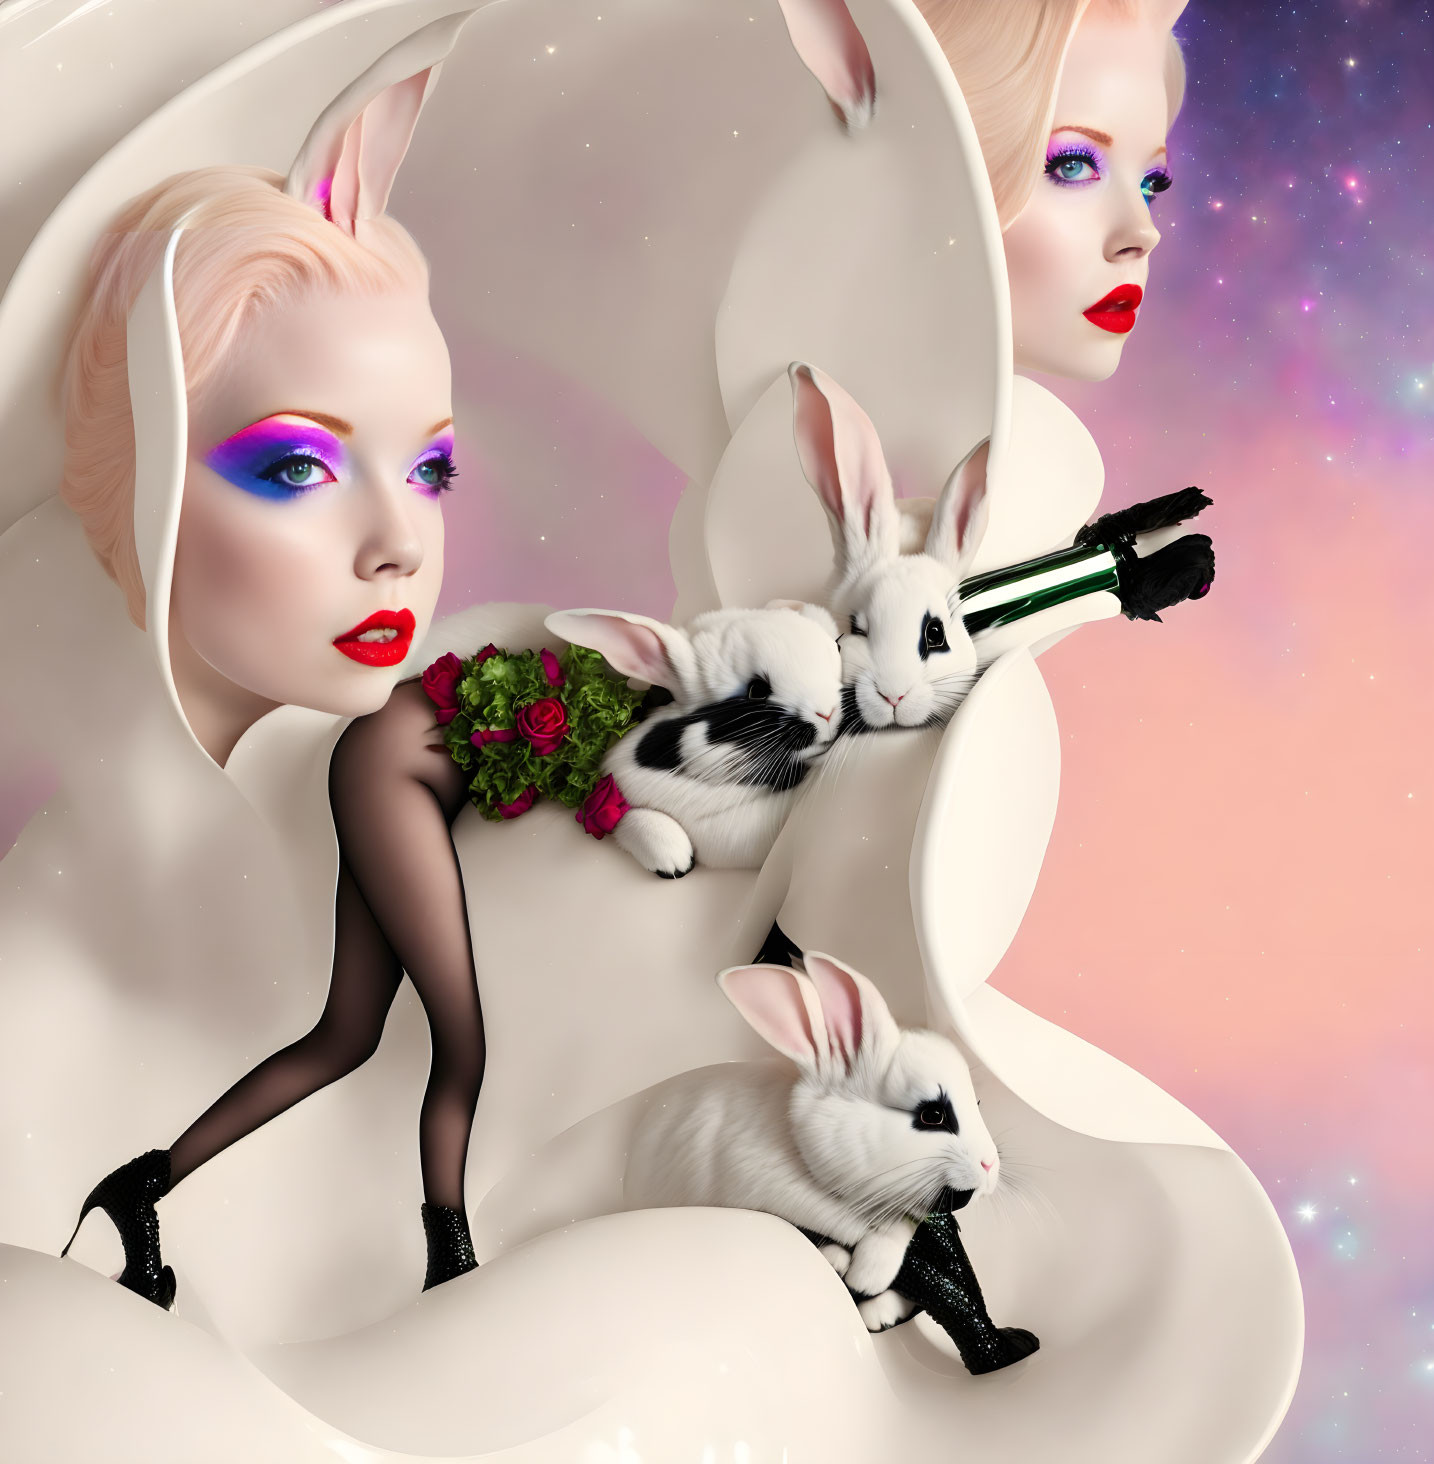 Surreal image: woman with rabbit ears, rabbits, cosmic background